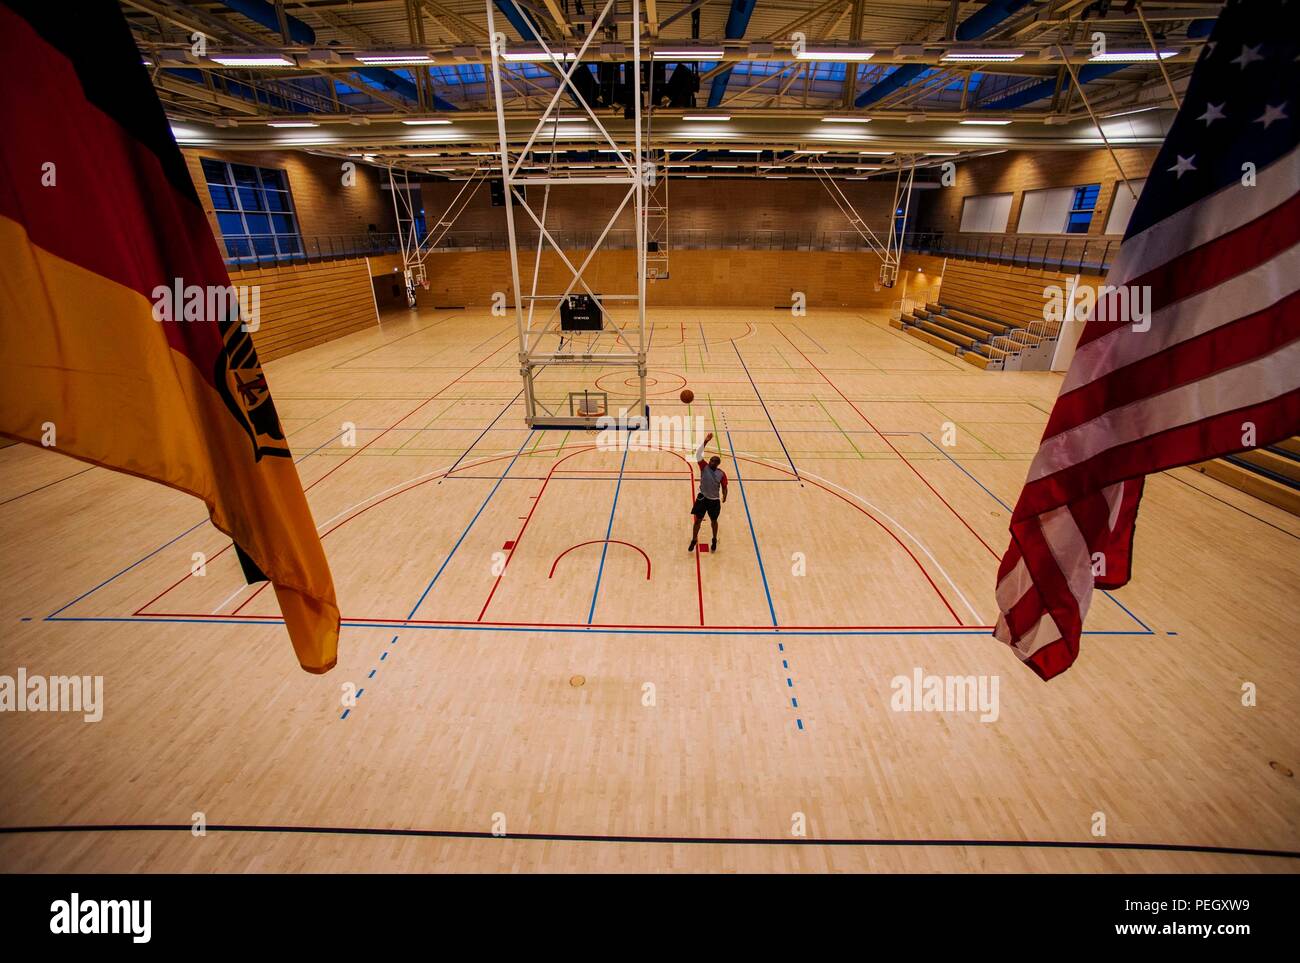 A base community member practices basketball during a swing shift at the  Eifel Powerhaus center on Spangdahlem Air Base, Germany, Aug. 20, 2015. The  fitness center offers weight-lifting machines, an indoor track,